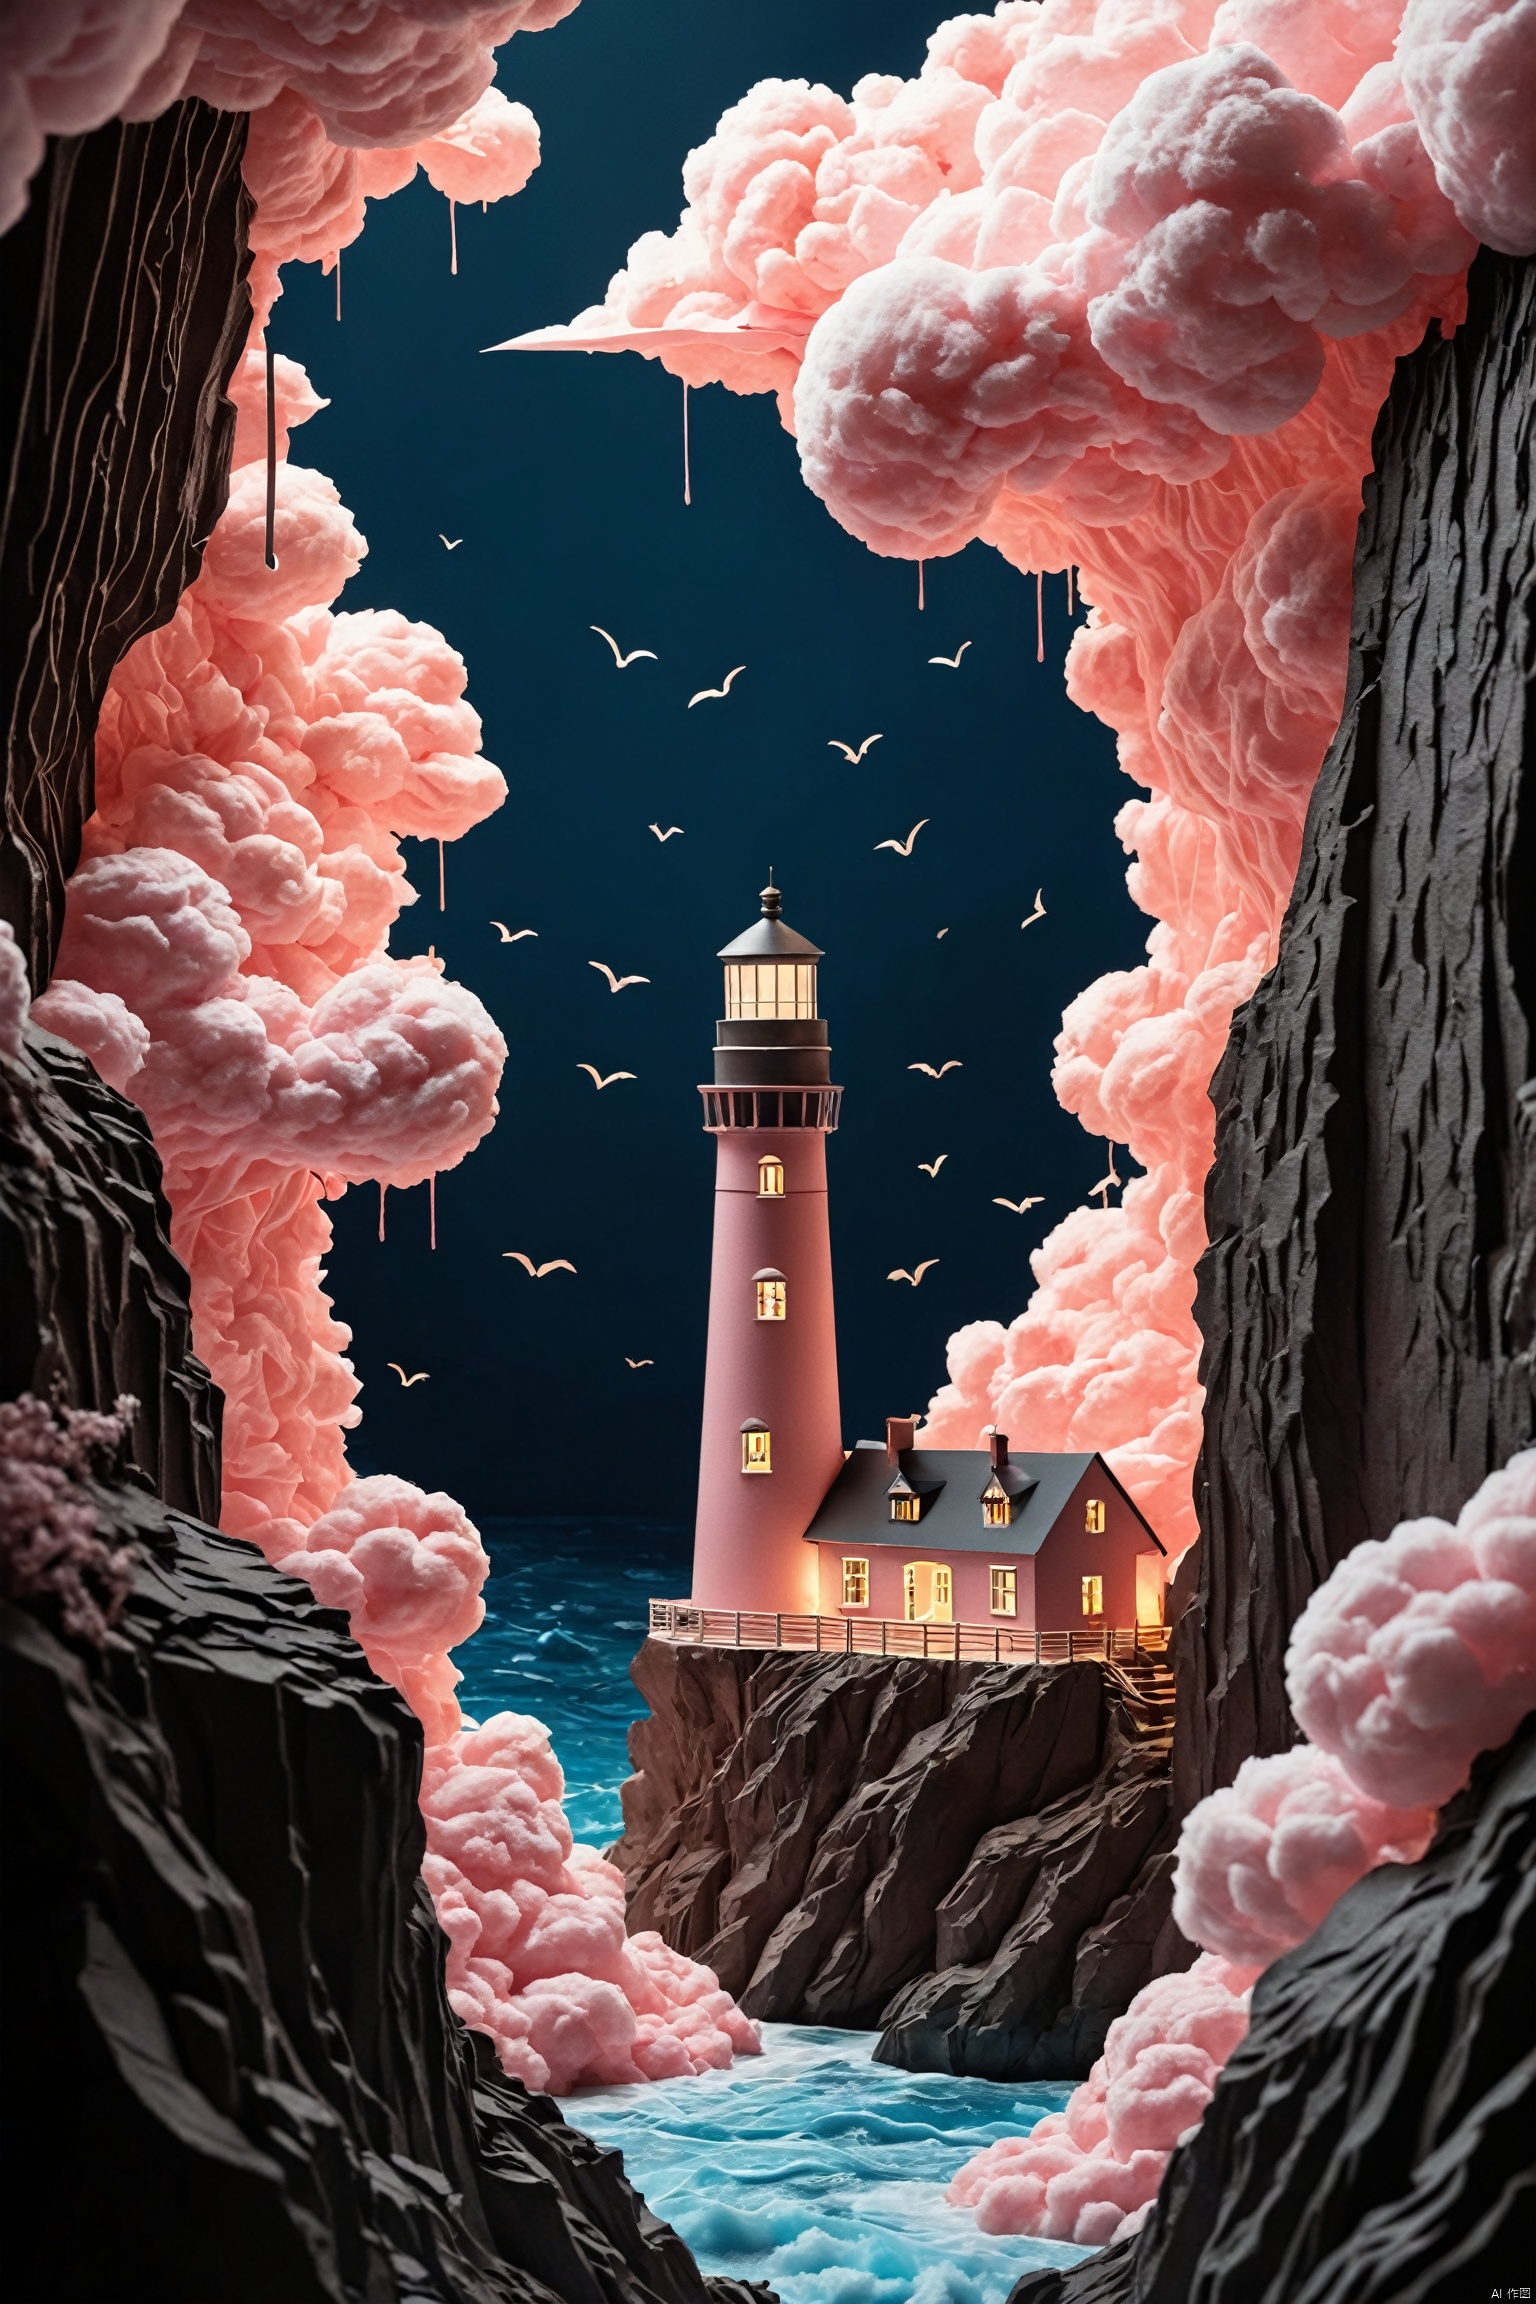 Glow-in-the-dark lighthouse on a cotton candy cliff. 
many details, extreme detailed, full of details
papercut, hole through foreground, paper hole
(prompt by @让AI更感性:0.01)
 